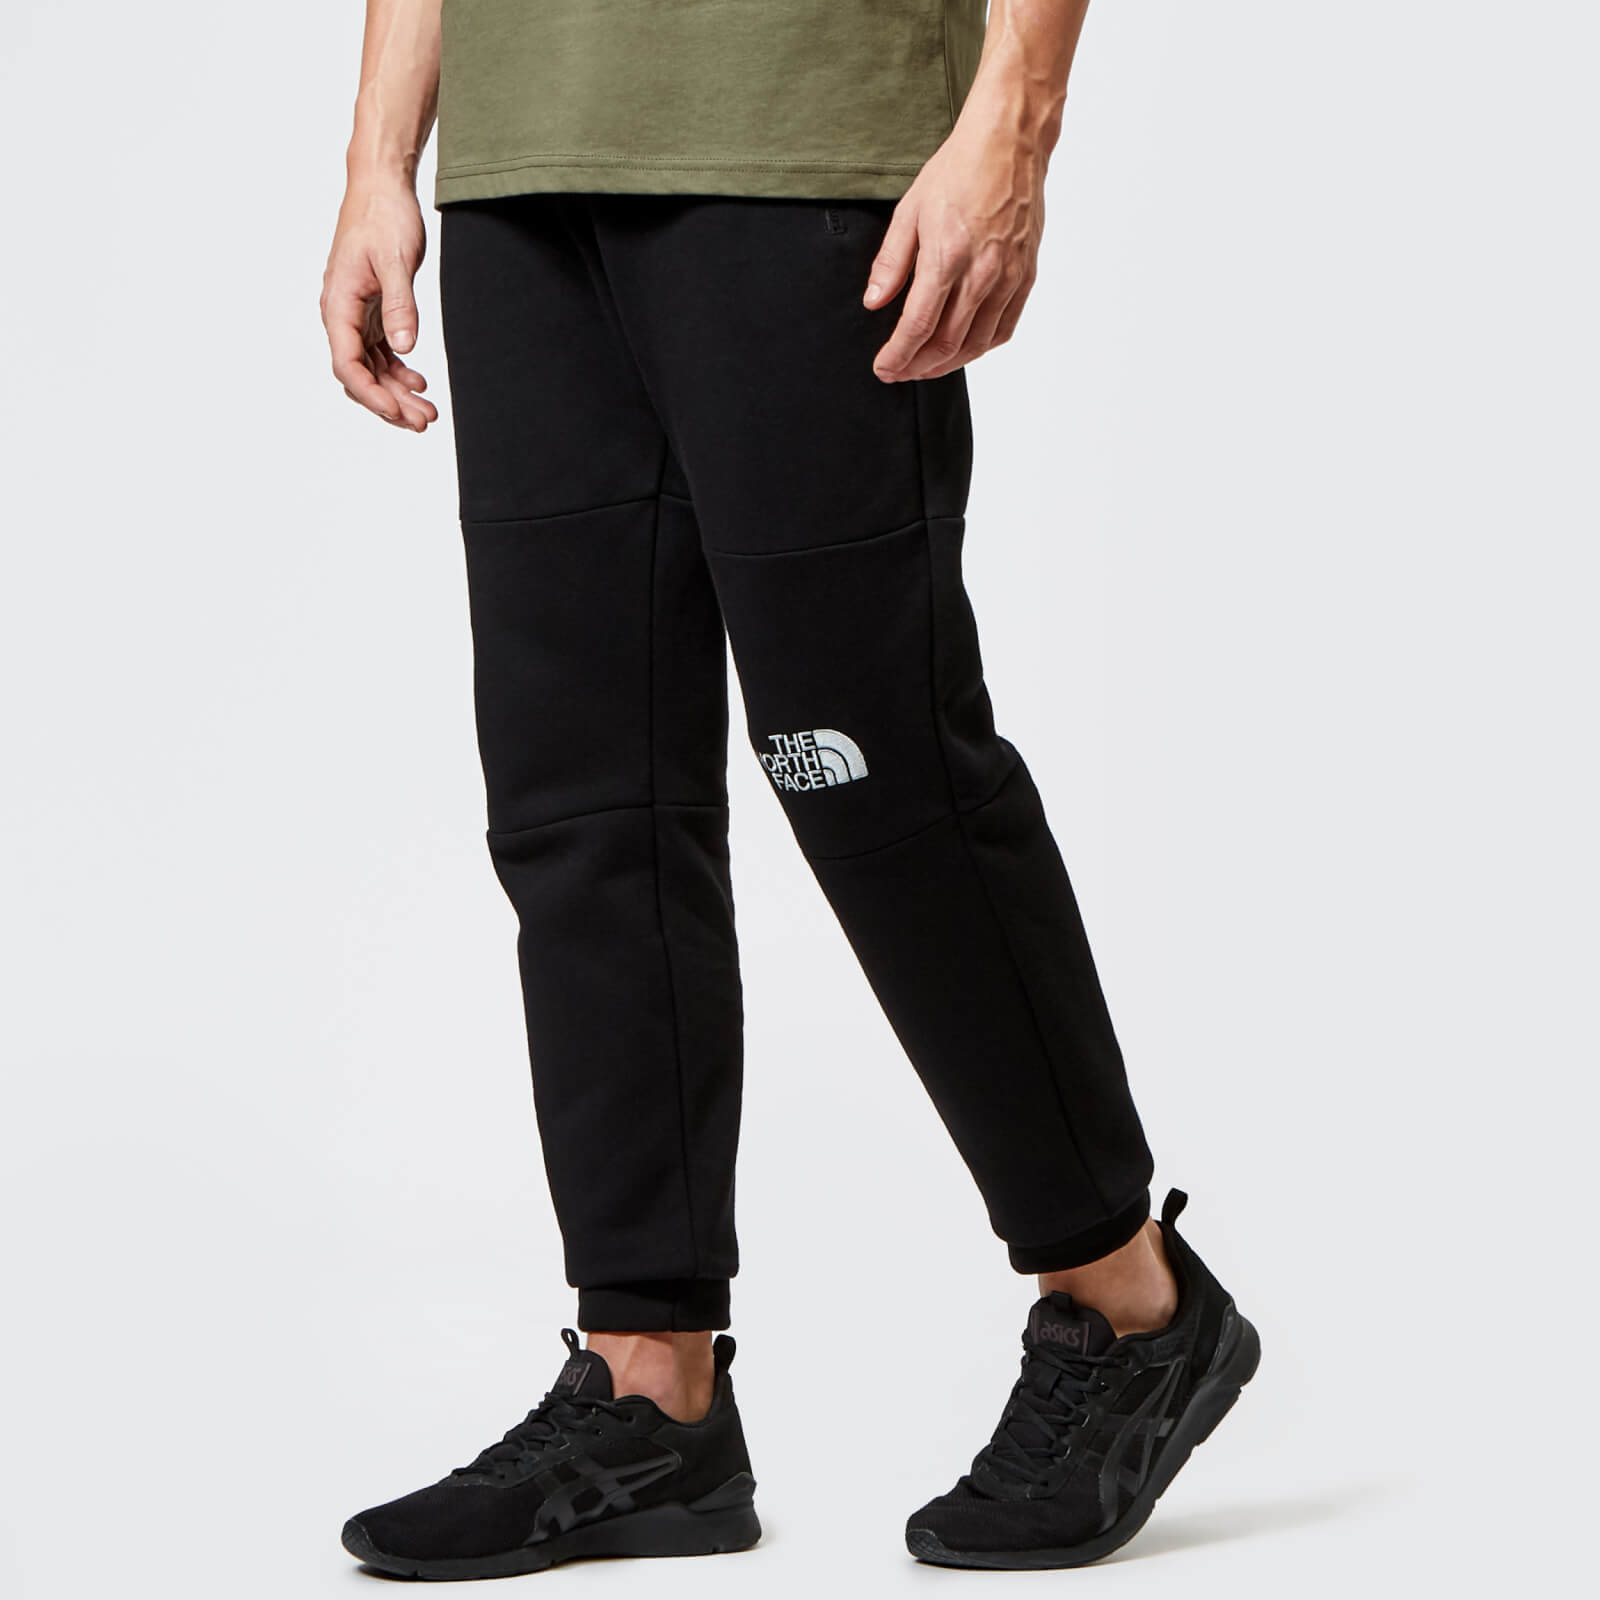 north face himalayan pant - dsvdedommel 